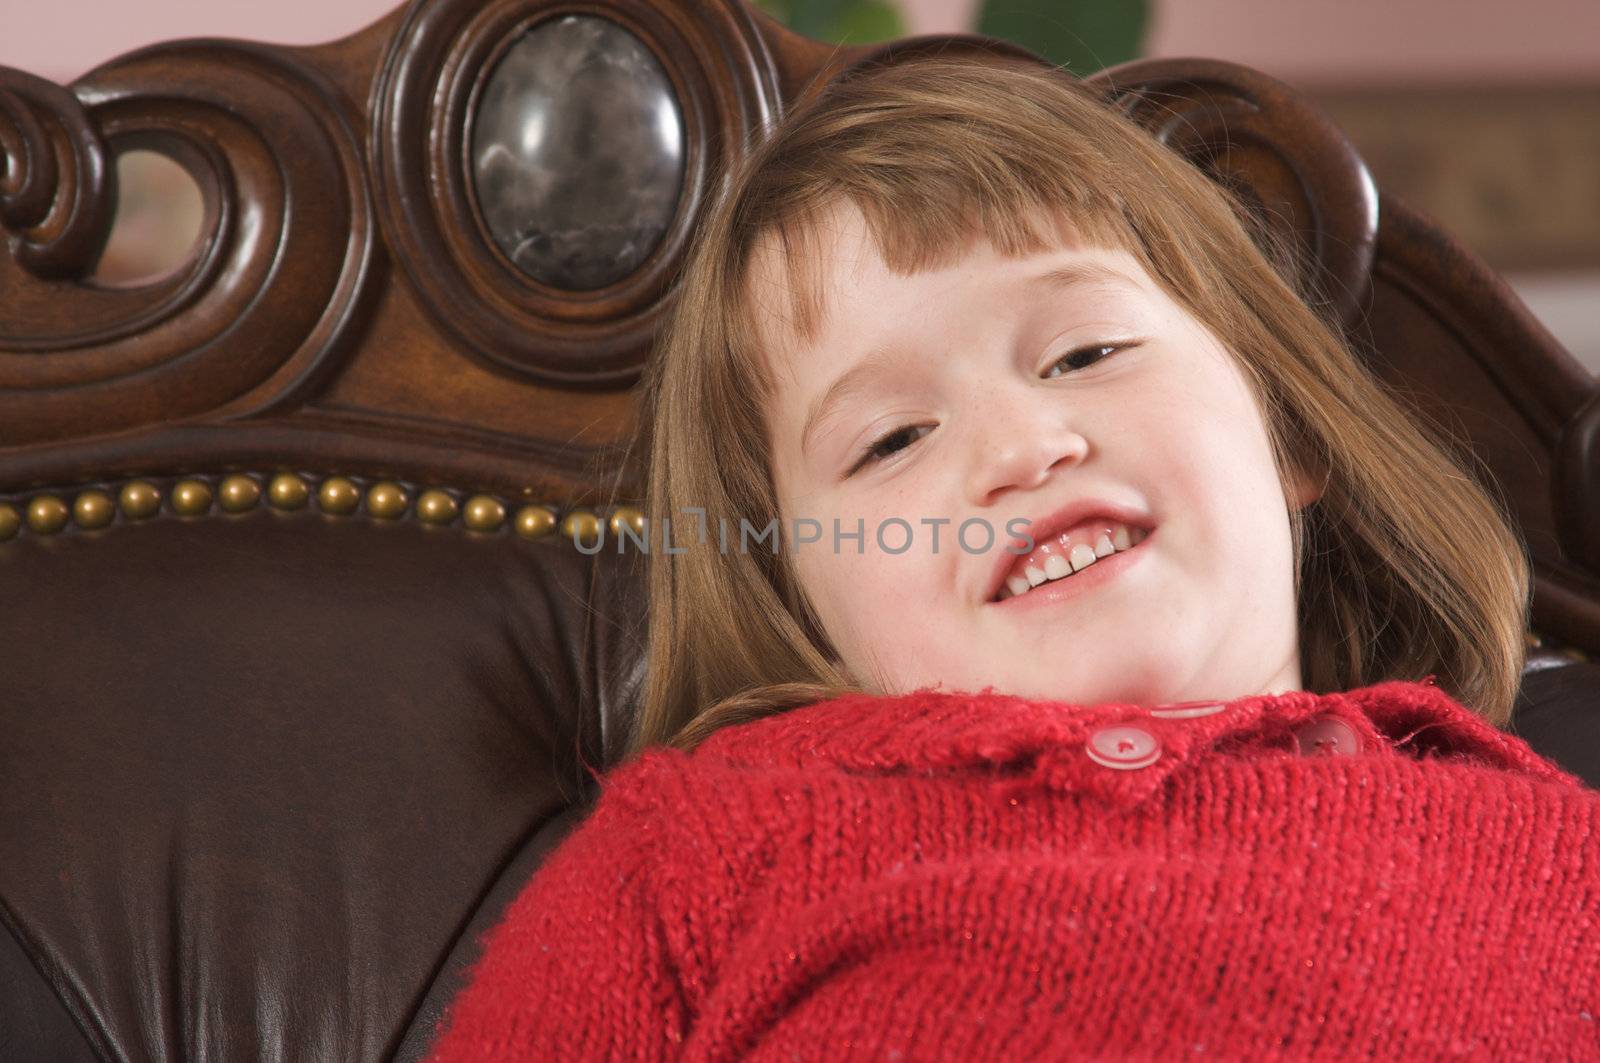 Adorable Girl Poses for a Fun Portrait on a Leather Chair